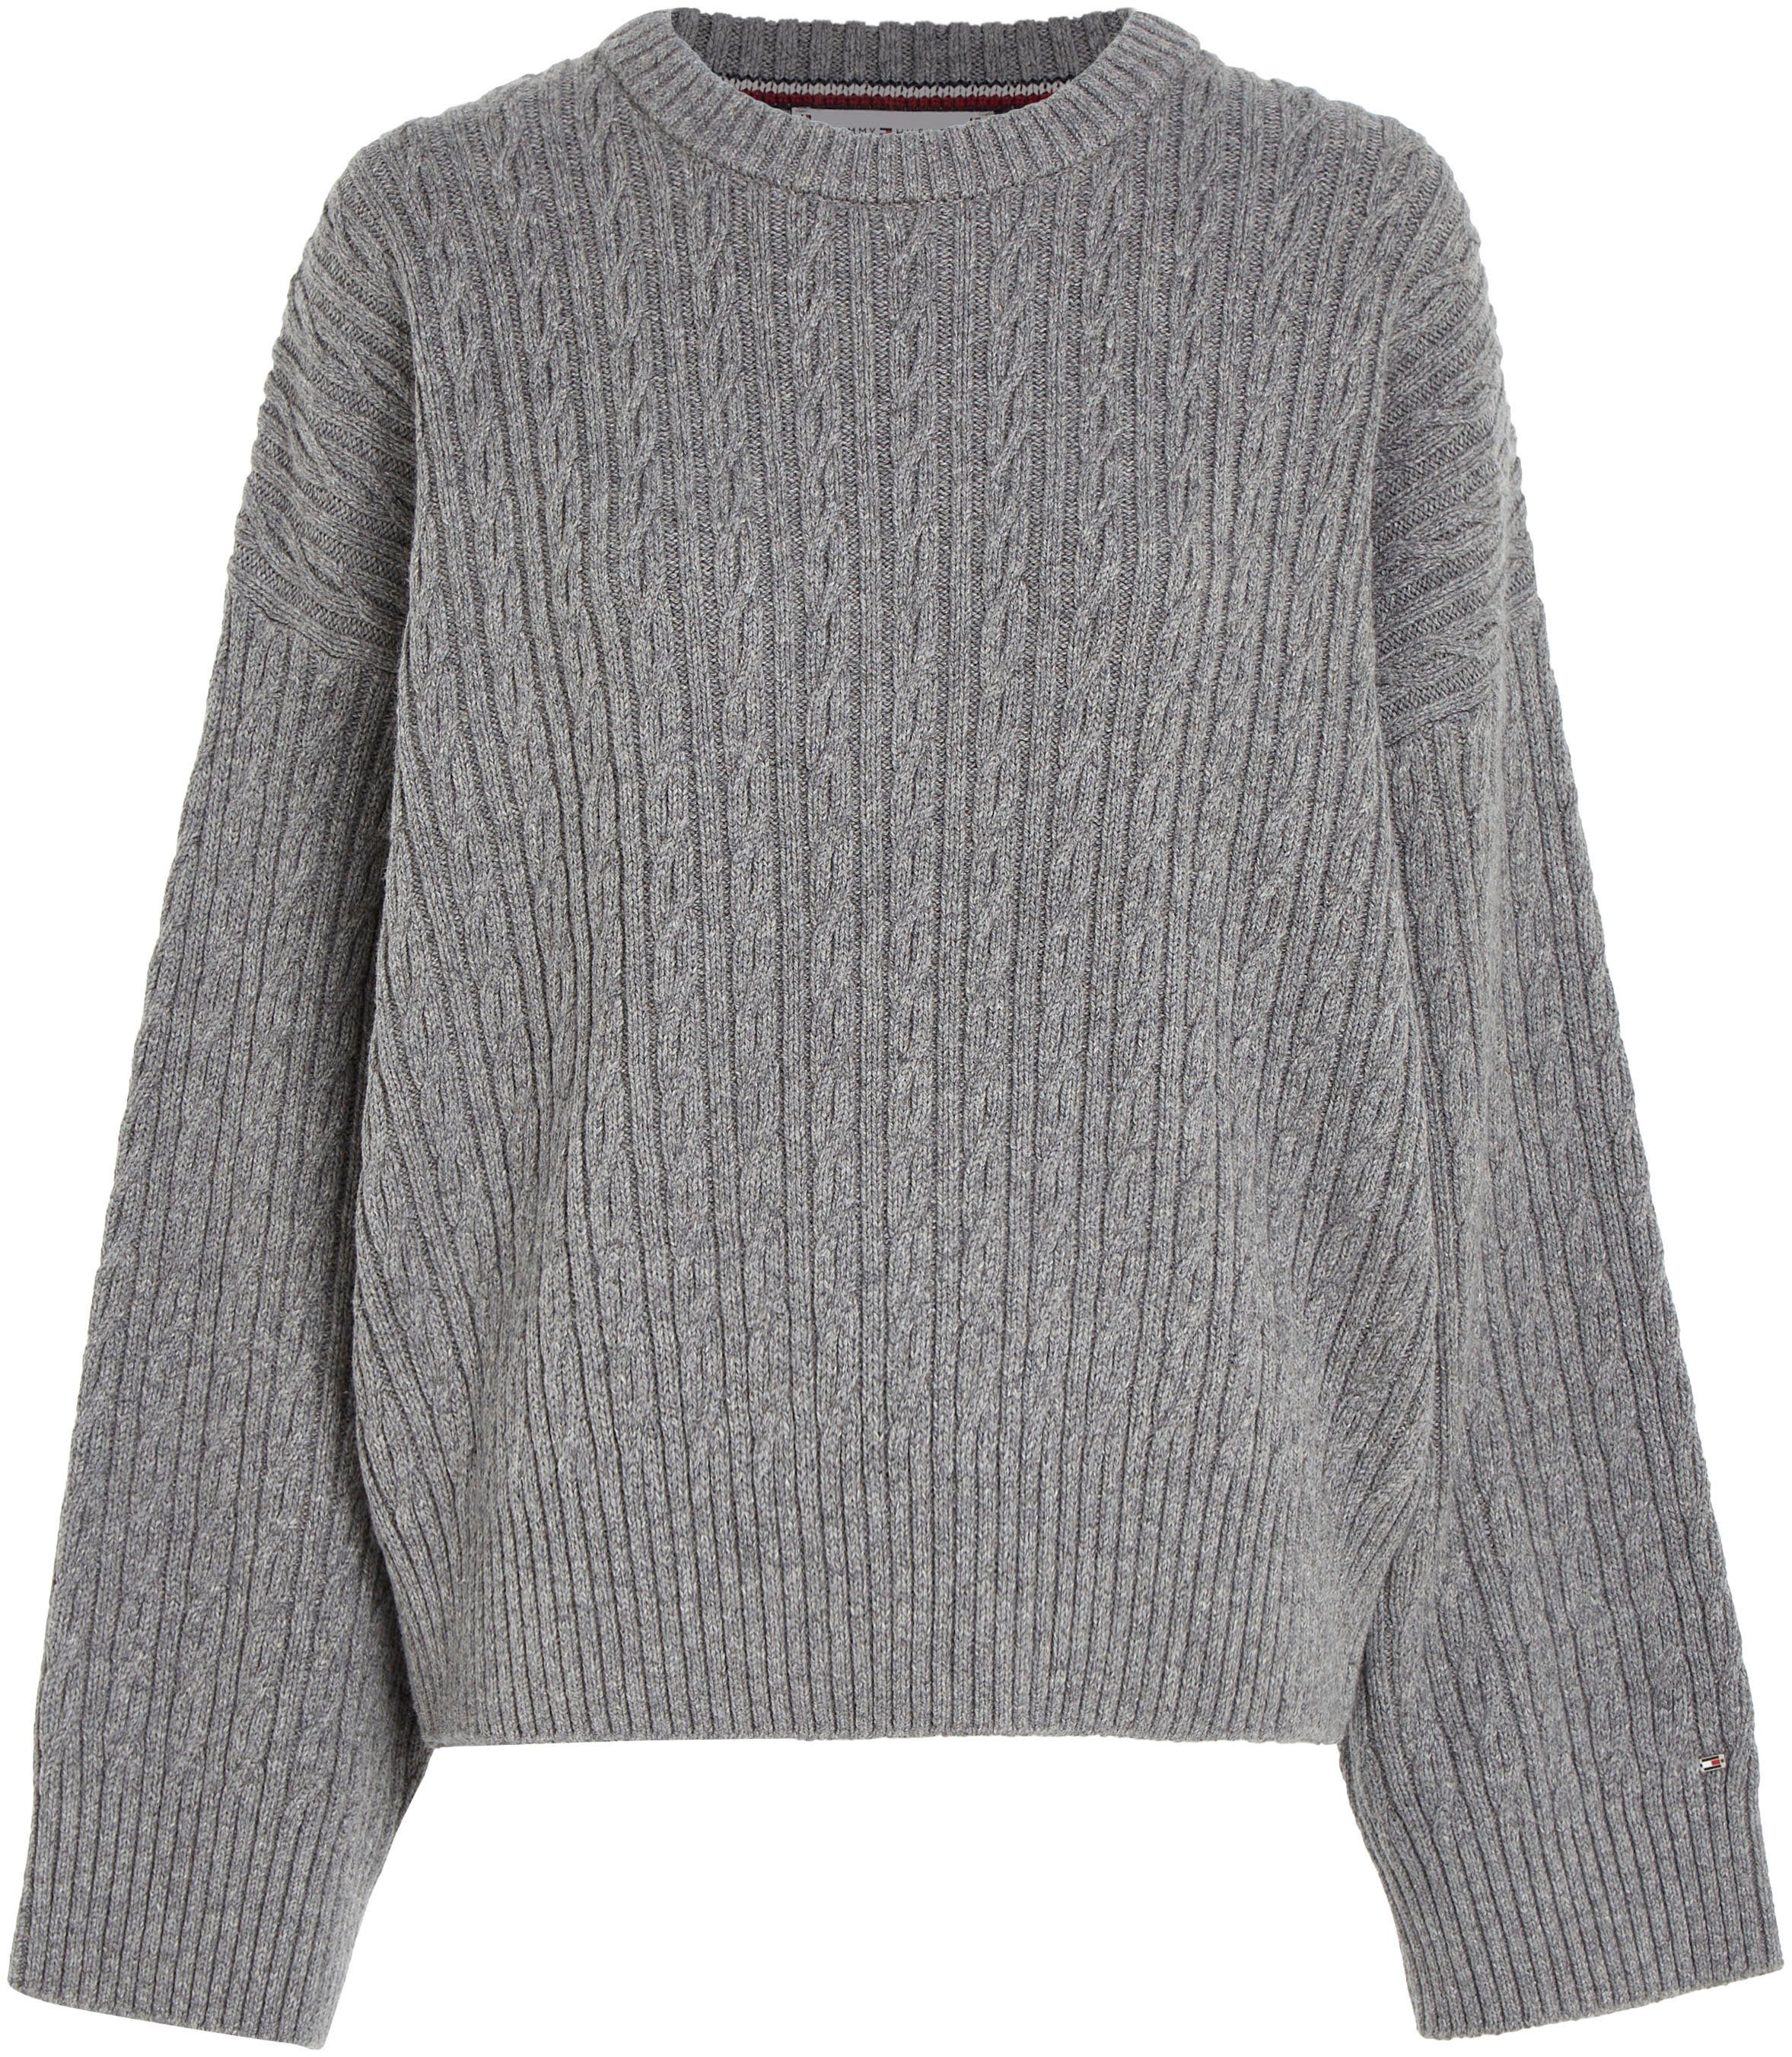 Med_Heather_Grey SWEATER allover ALL OVER C-NK CABLE Tommy Hilfiger Zopfmuster Rundhalspullover mit